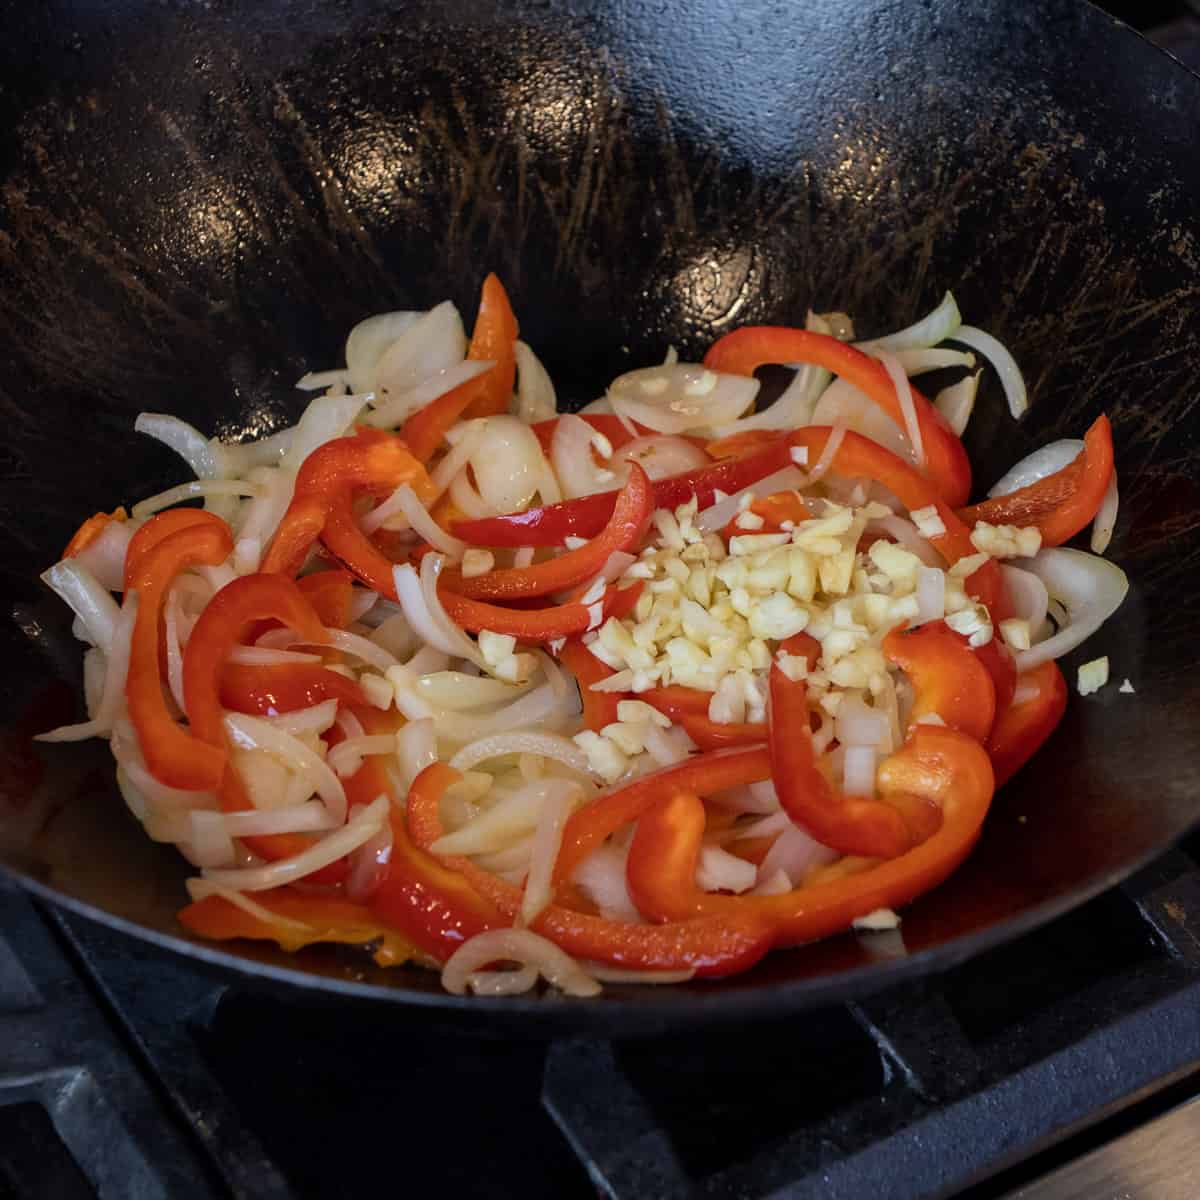 Sliced onion and pepper with minced garlic sautéing in a wok.